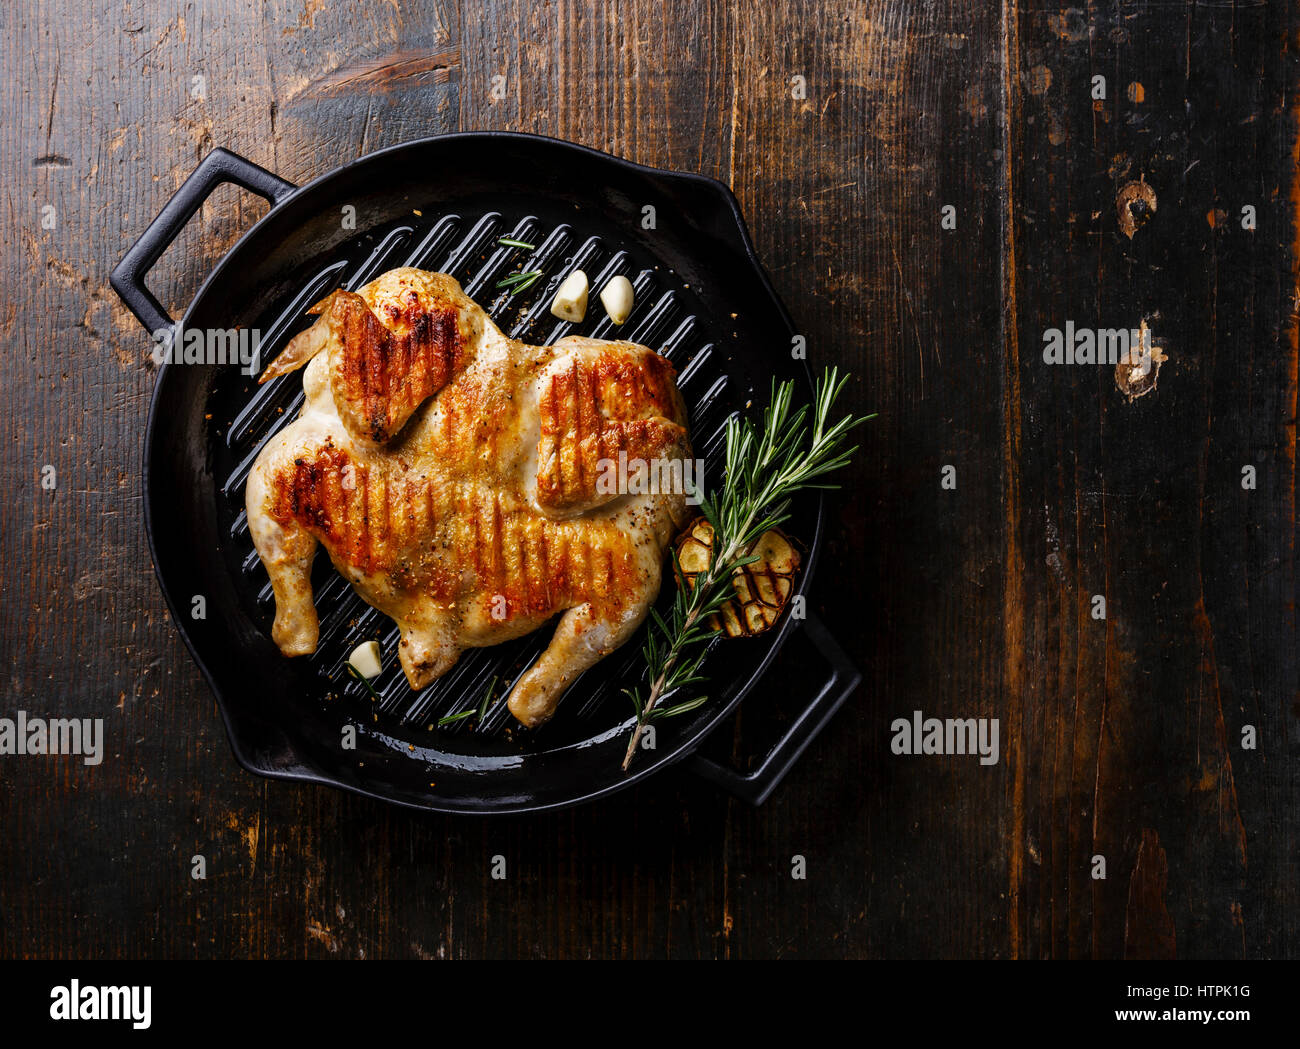 Grilled fried roast Chicken Tabaka in frying pan on wooden background copy space Stock Photo